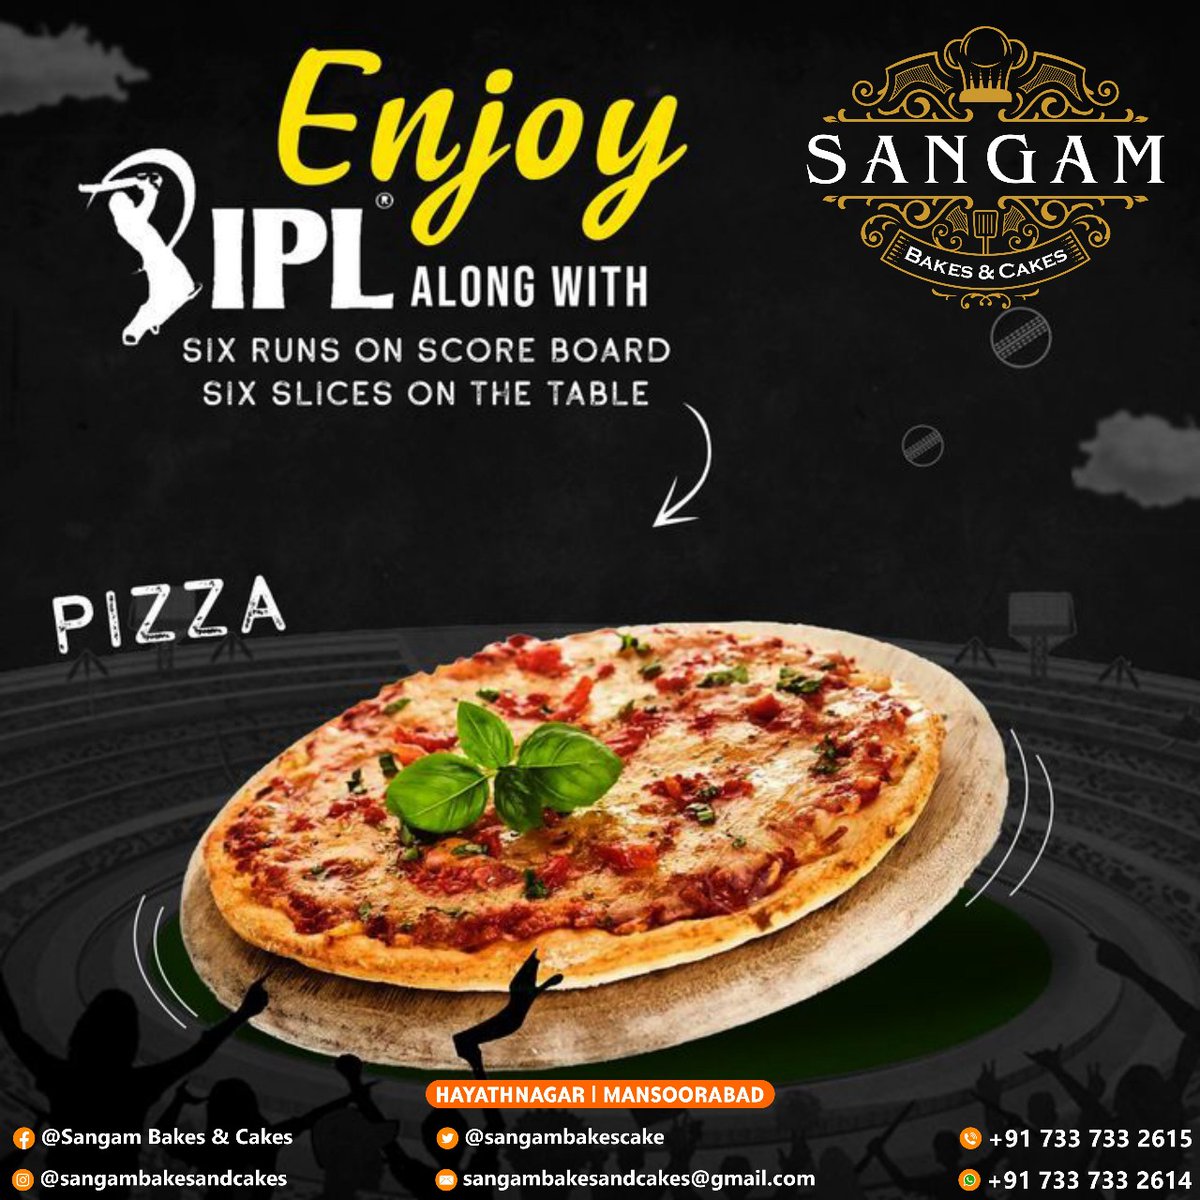 Enjoy IPL along with Six Runs on Score Board six Slices on the table! @sangambcmanso

#pizza #food #foodporn #pizzalover #foodie #pizzatime #instafood #italianfood #delivery #pizzalovers #pasta #pizzeria #foodblogger #foodphotography #foodlover #yummy #foodstagram #delicious